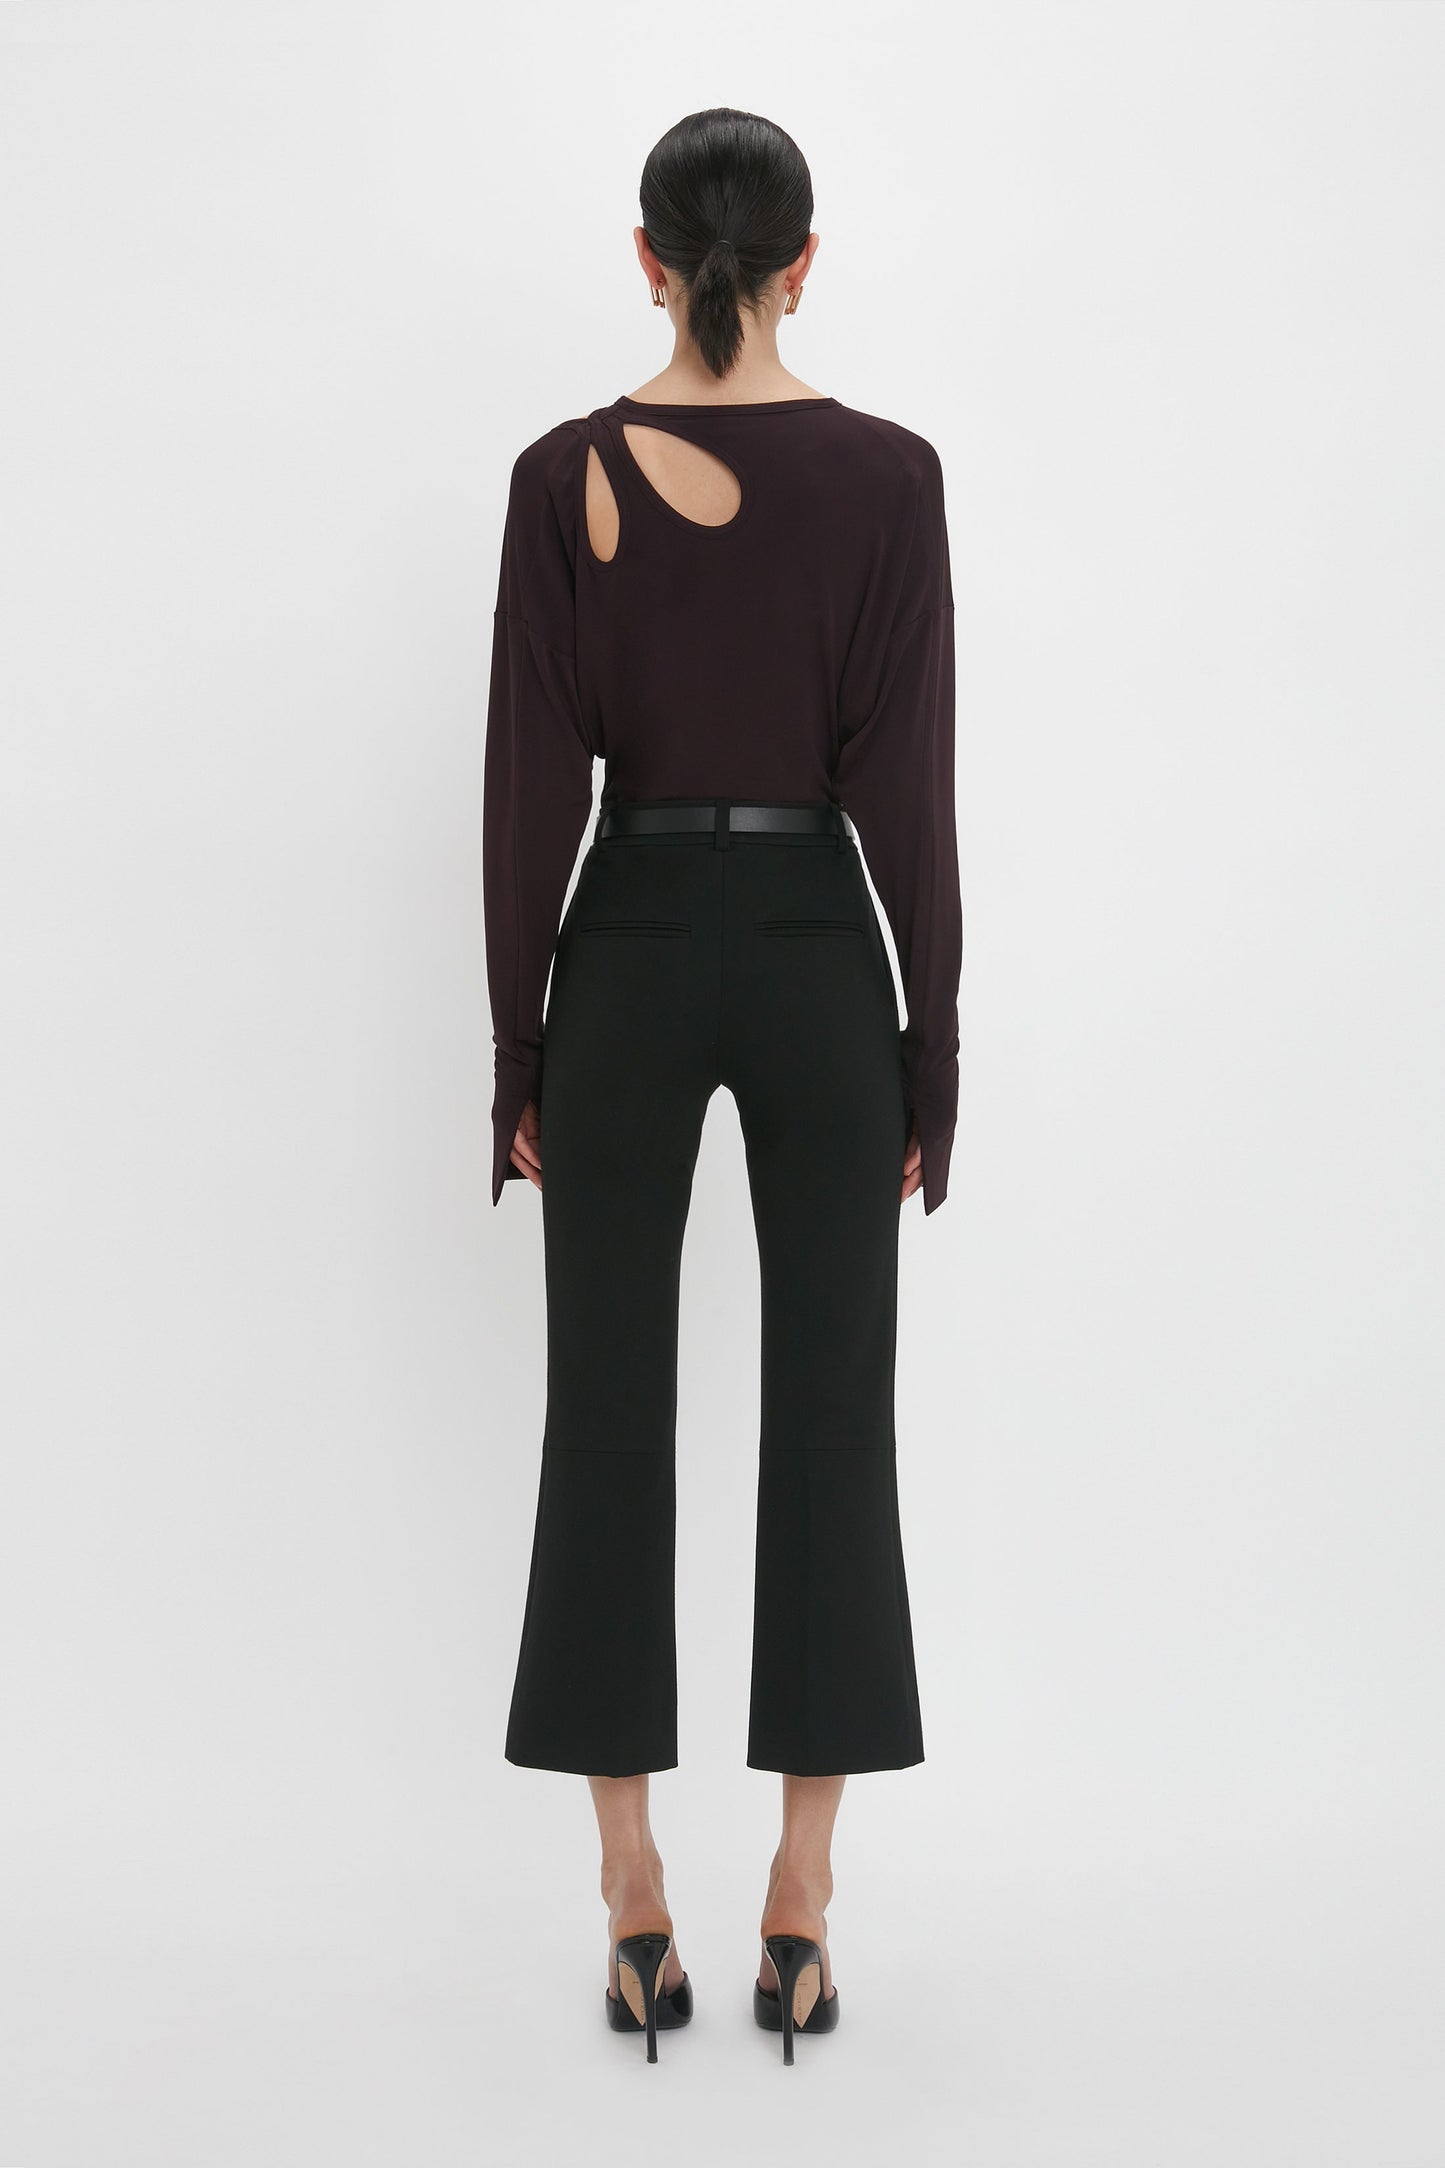 A person stands facing away, embracing a minimalist aesthetic in a long-sleeve black top with a cutout detail on the shoulder, Cropped Kick Trouser In Black by Victoria Beckham, and black high heels against a plain white background.